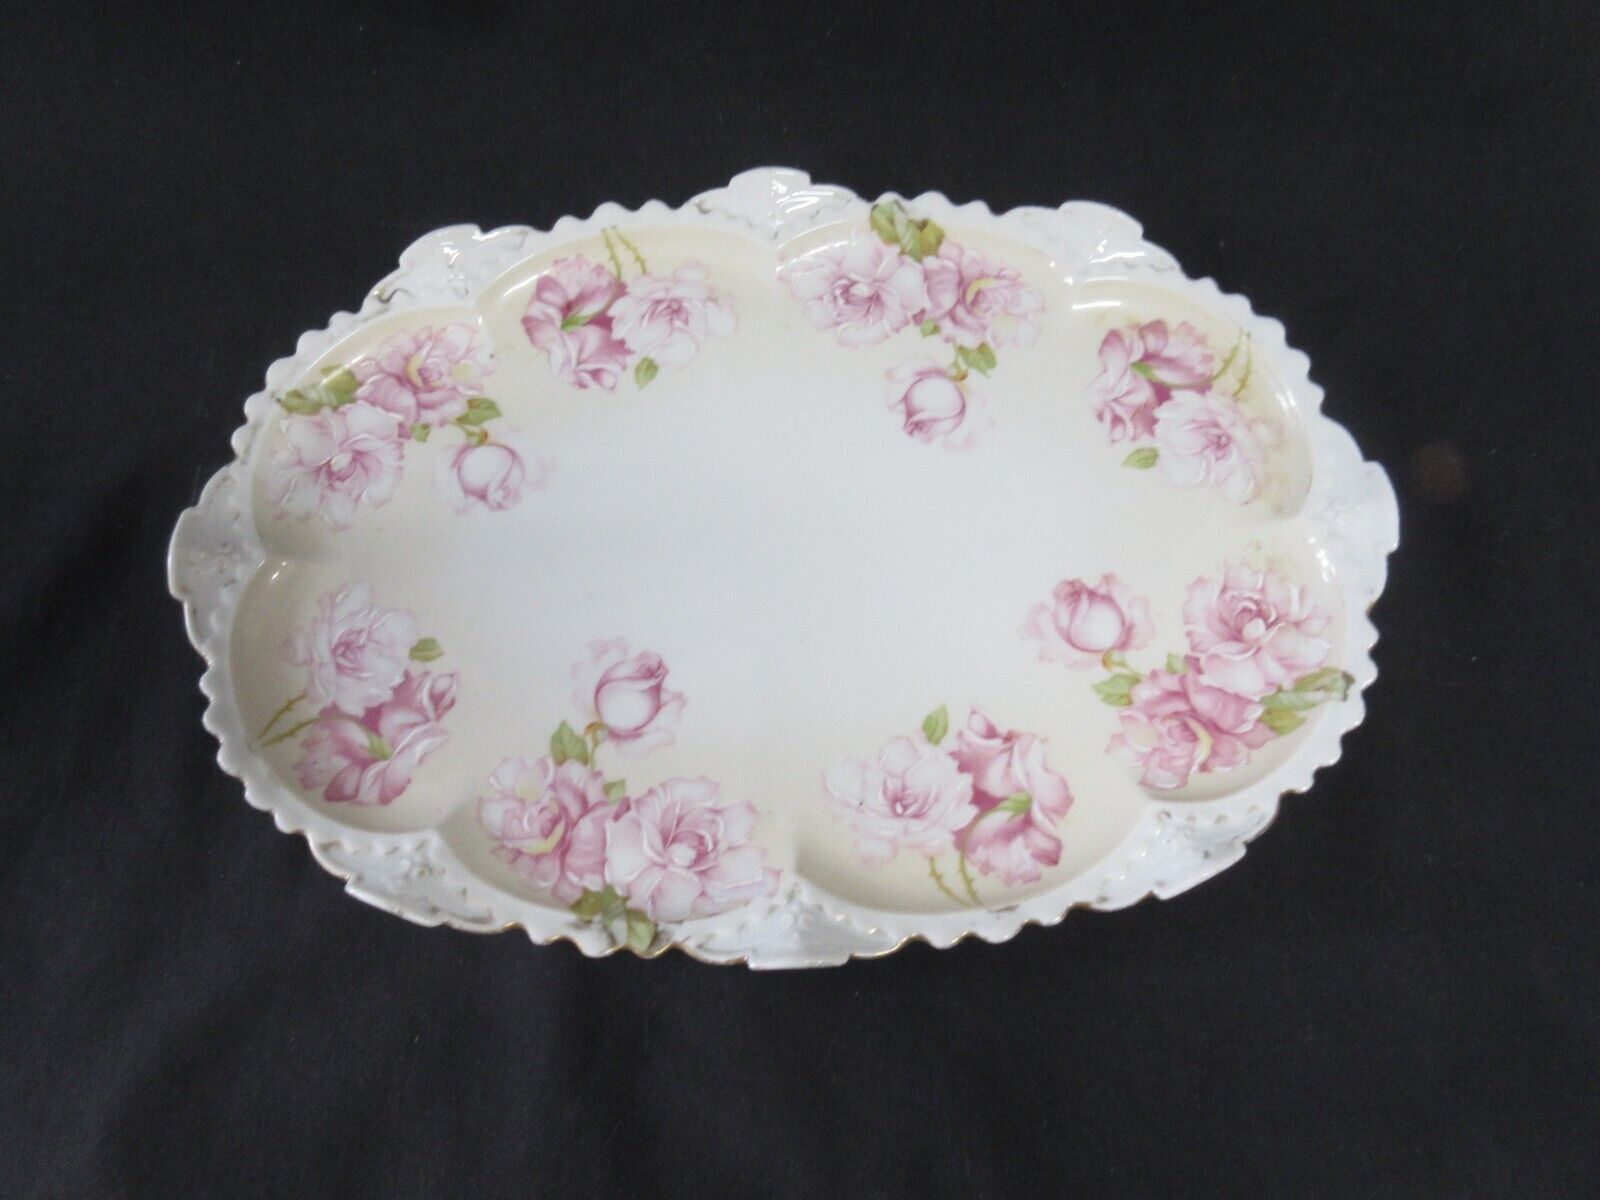 LG Antique Kaiserin Maria Theresia Carlsbad Porcelain HP Scalloped Dresser Tray